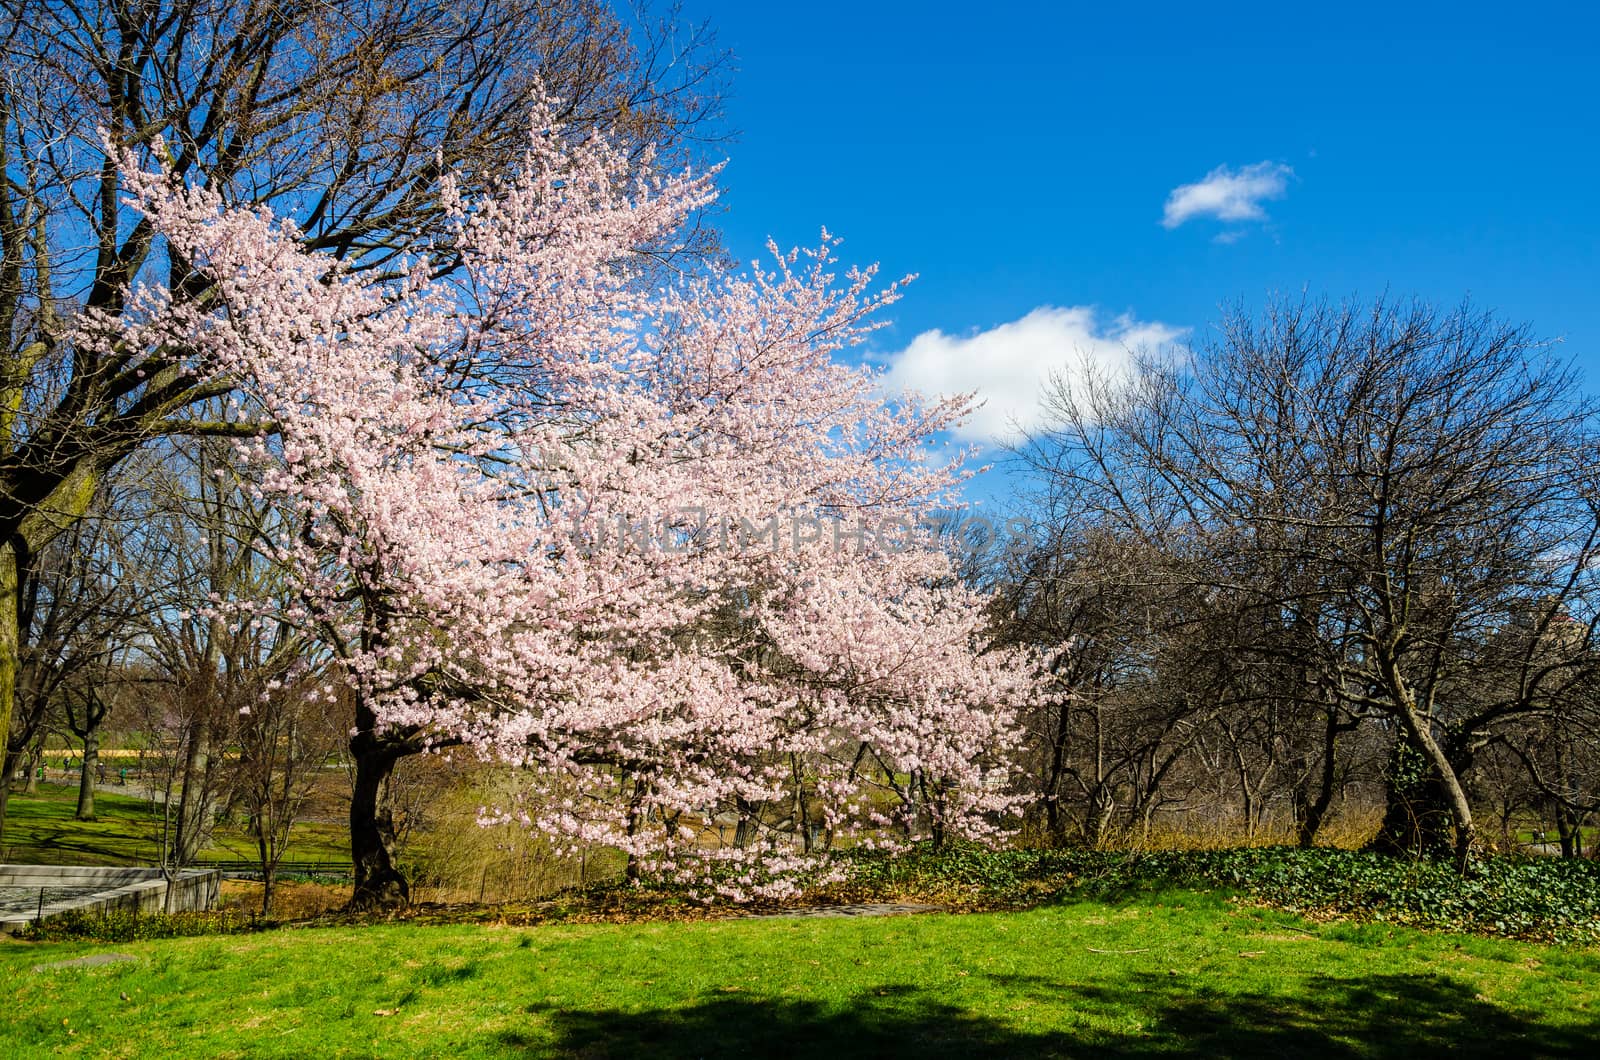 Cherry blossom in full bloom in Central Park, New York, USA by mauricallari